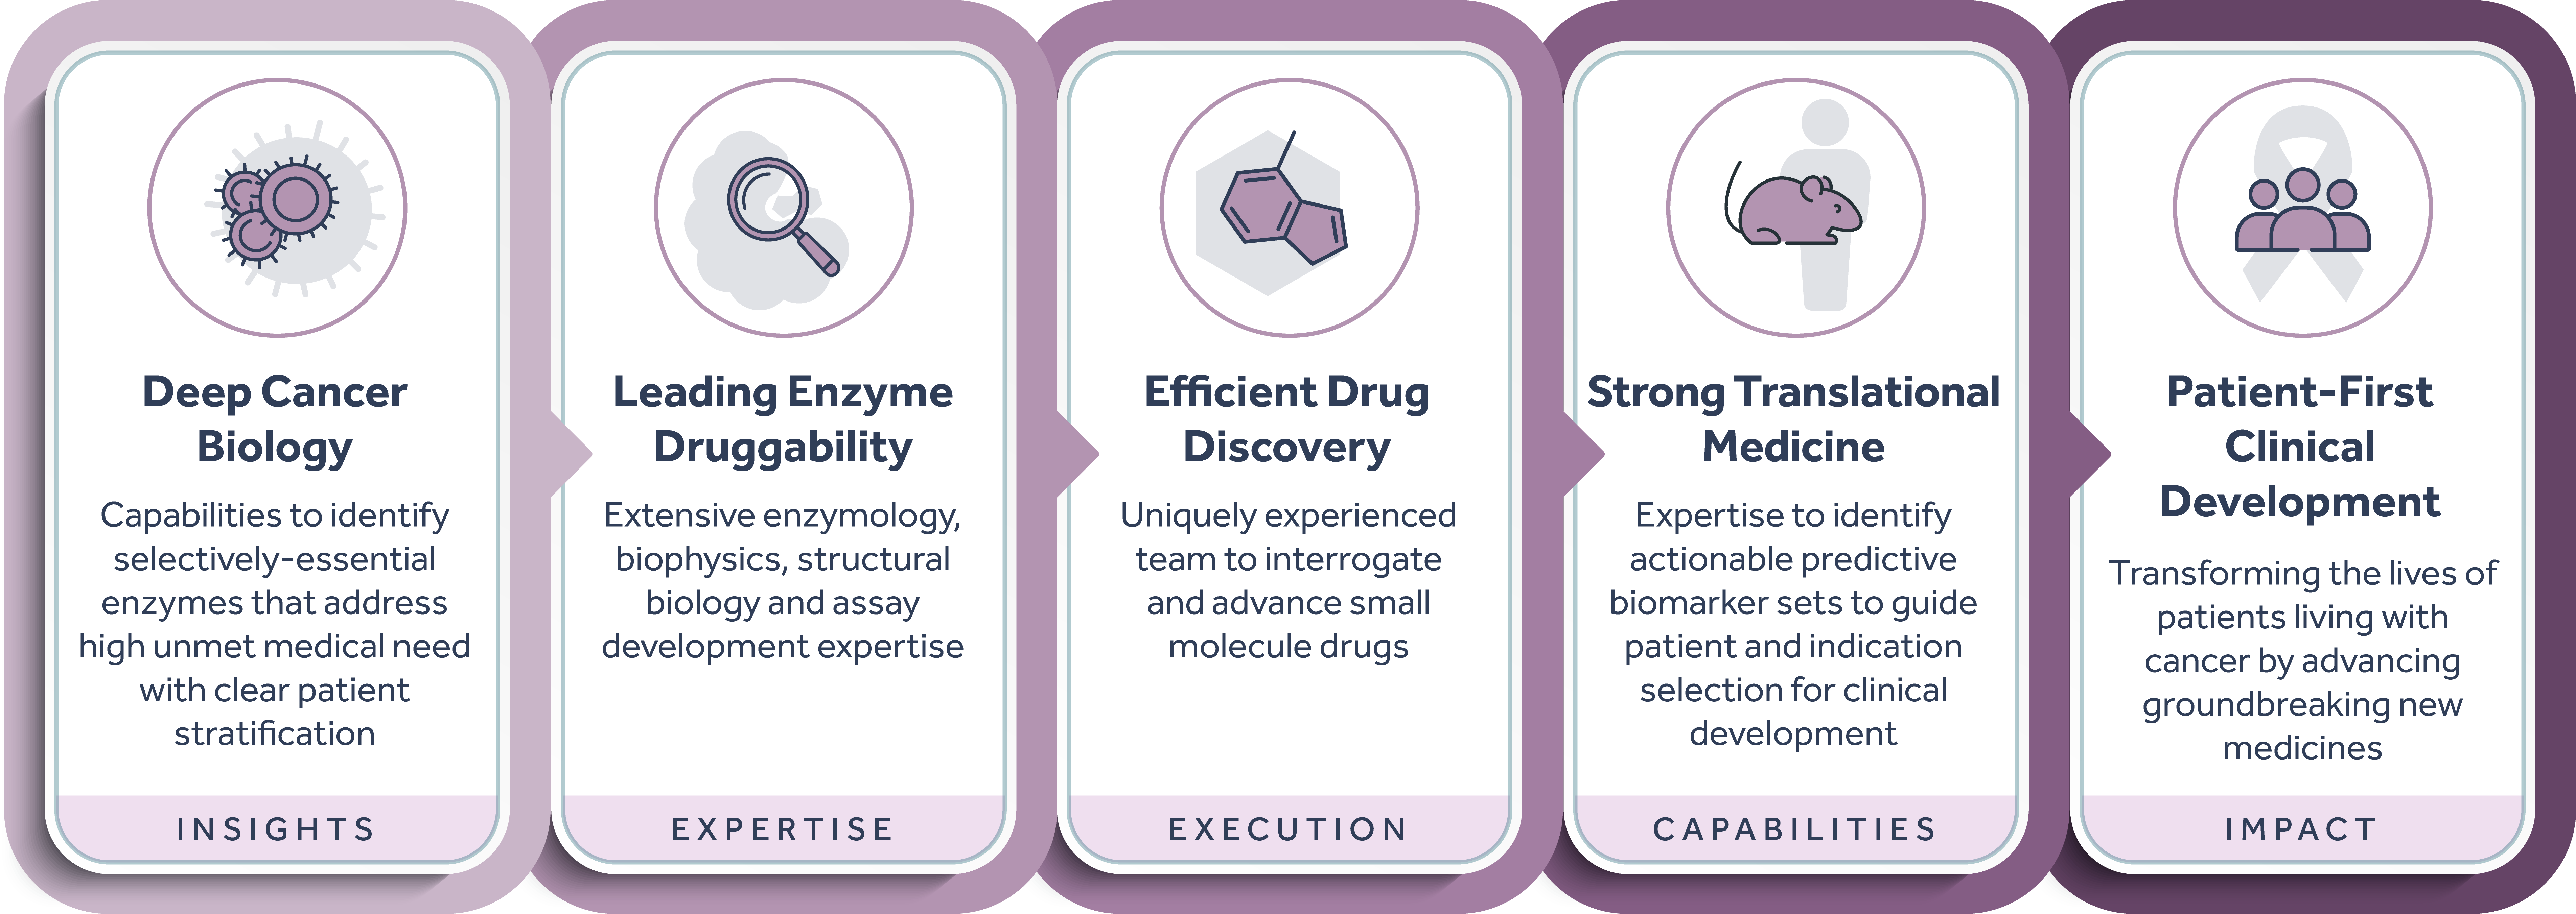 5-panel graphic outlining Accent integrated capabilities, including deep cancer biology, lead enzyme druggability, efficient drug discovery, strong translational medicine, and clinical development.